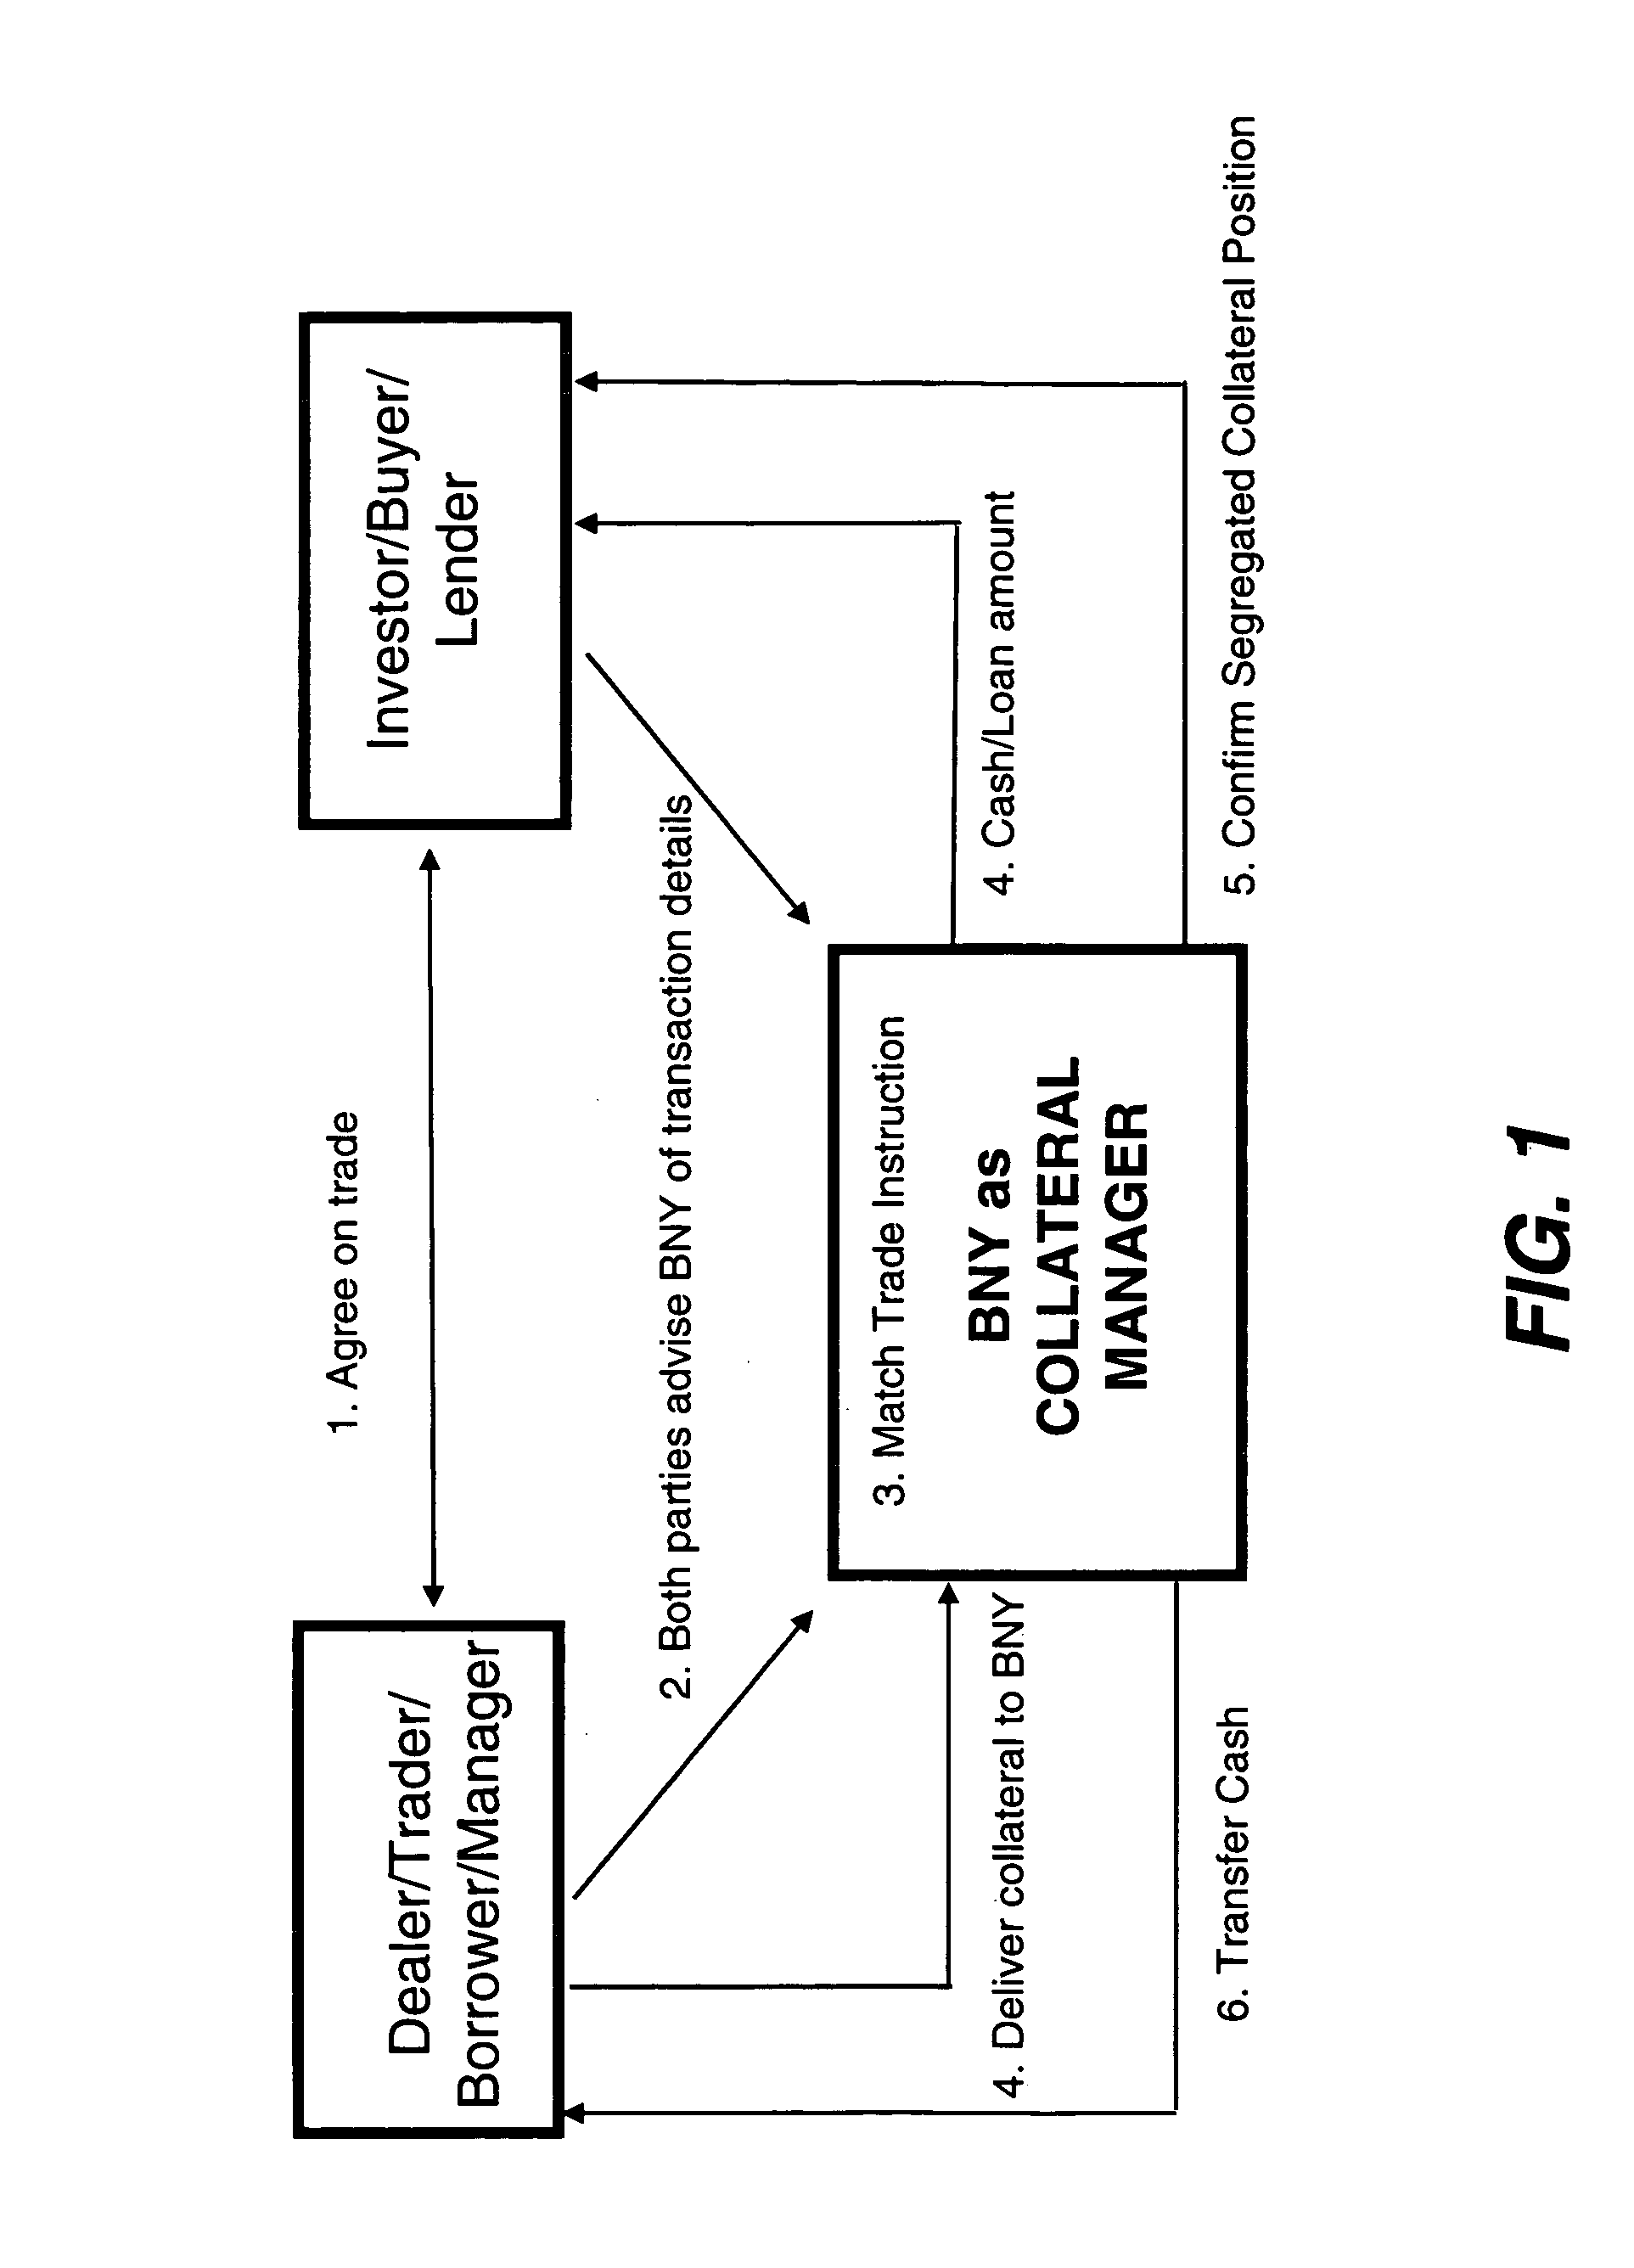 Systems and methods for automated repurchase agreement matching